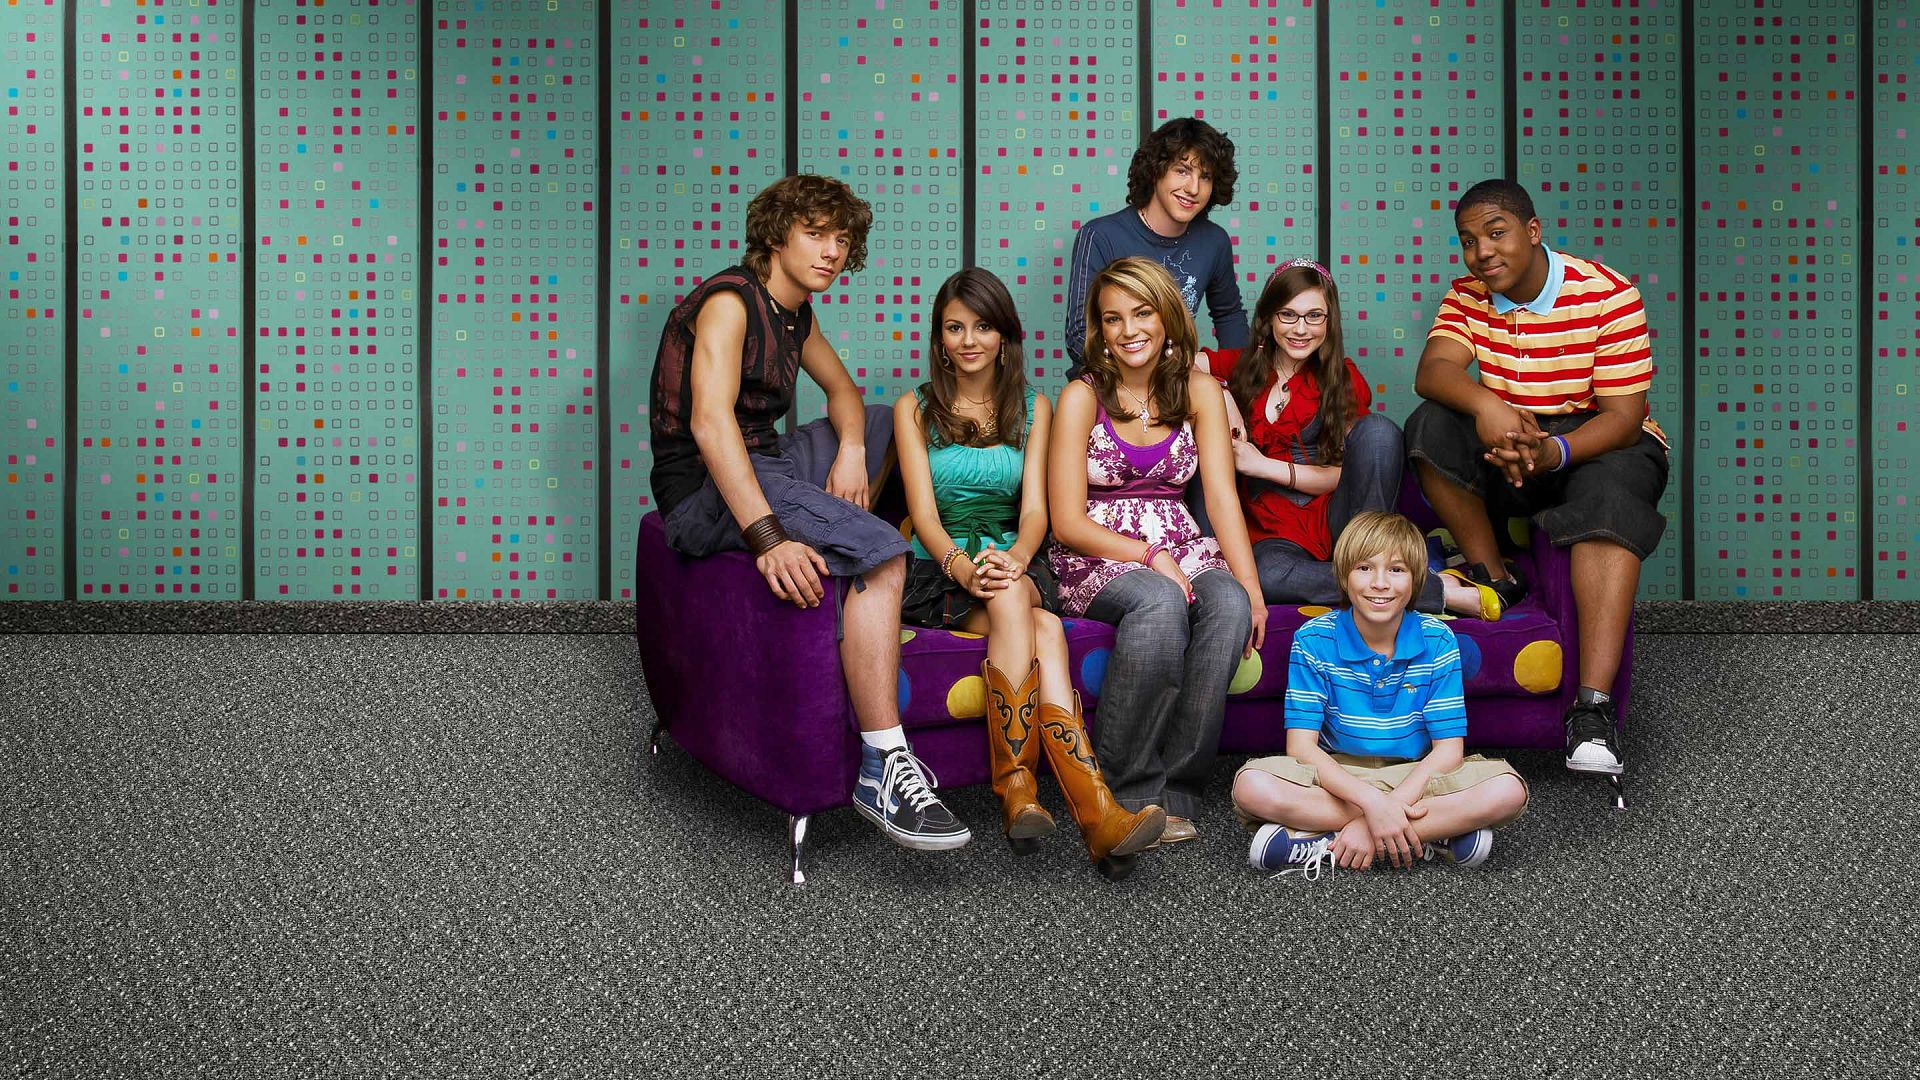 Zoey 101 - Nickelodeon - Watch on Paramount Plus